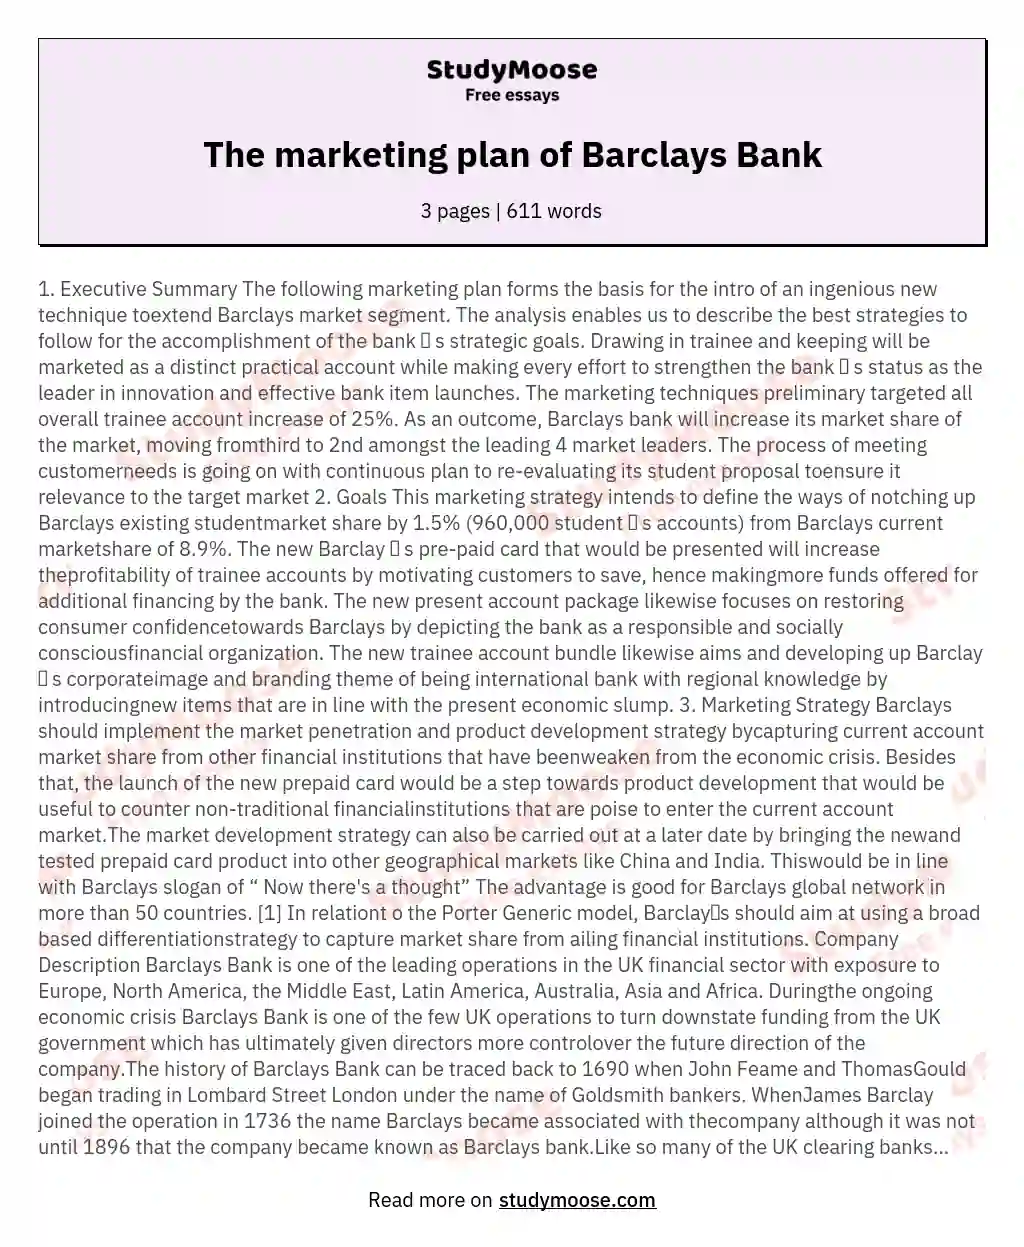 Barclays Bank Marketing Strategy: Driving Growth and Innovation essay